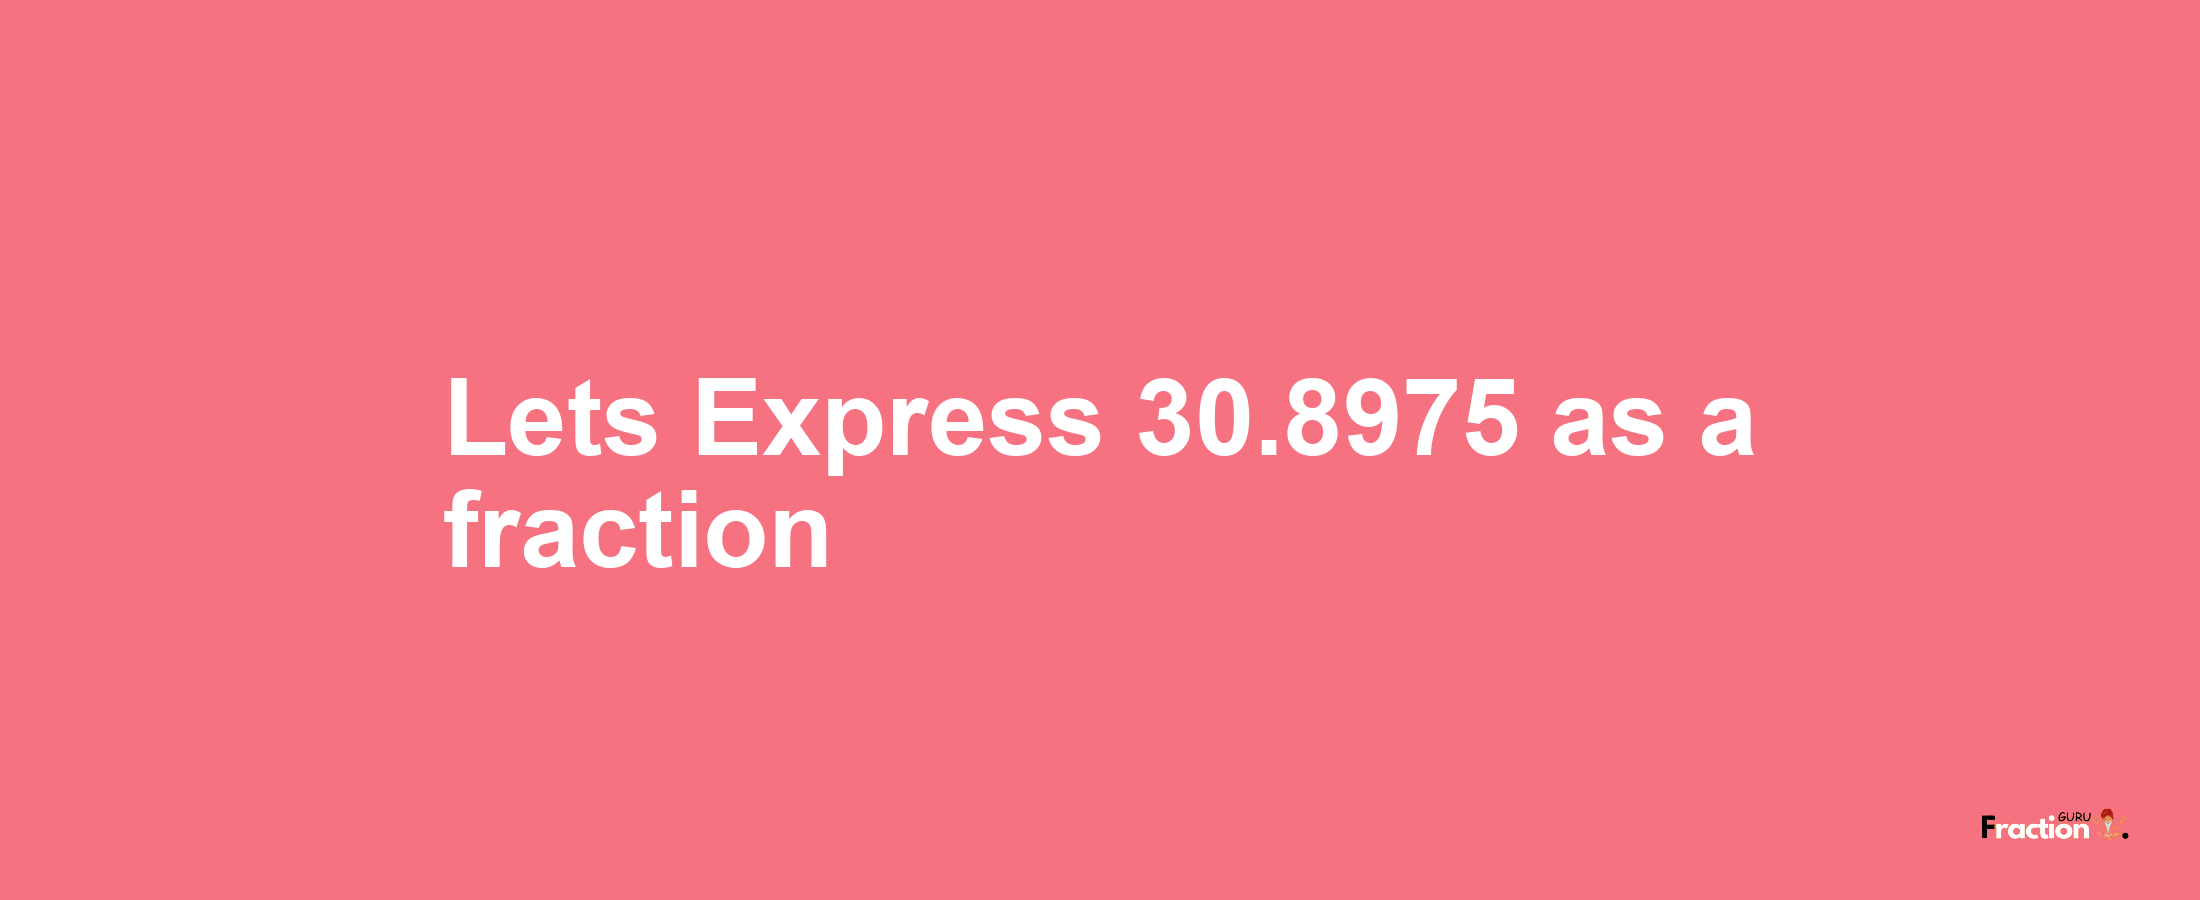 Lets Express 30.8975 as afraction